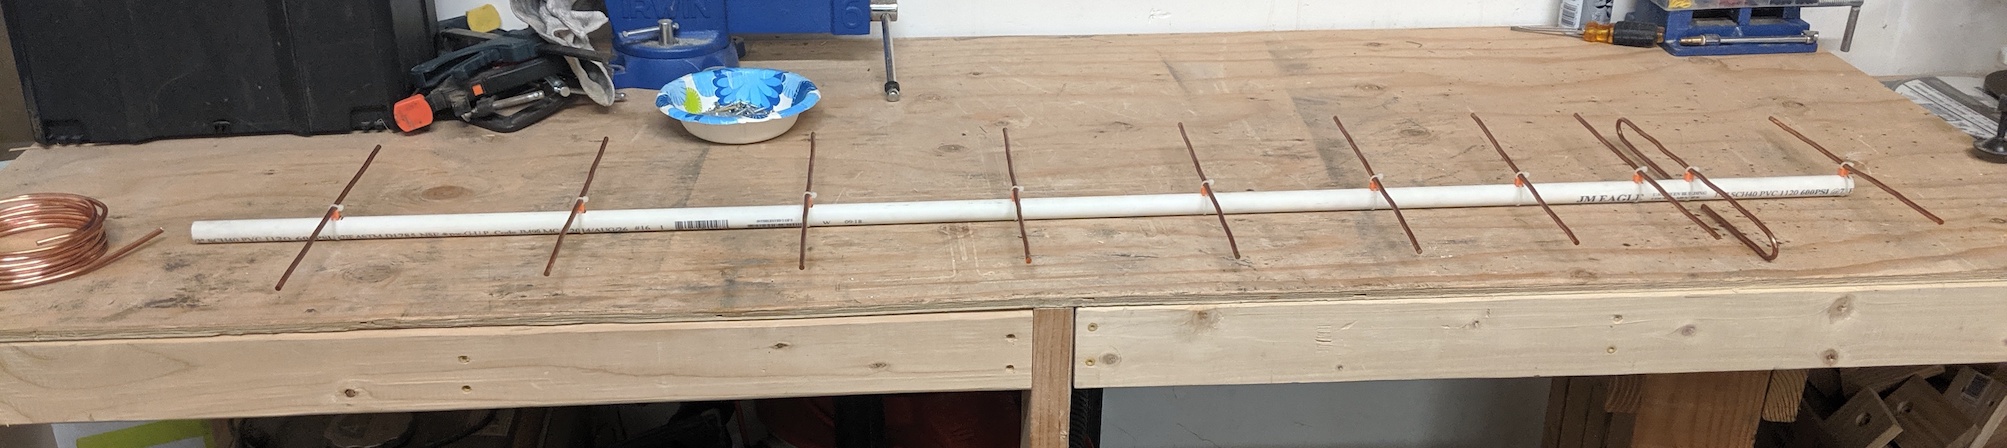 Photo of a completed ten-element Yagi-Uda antenna